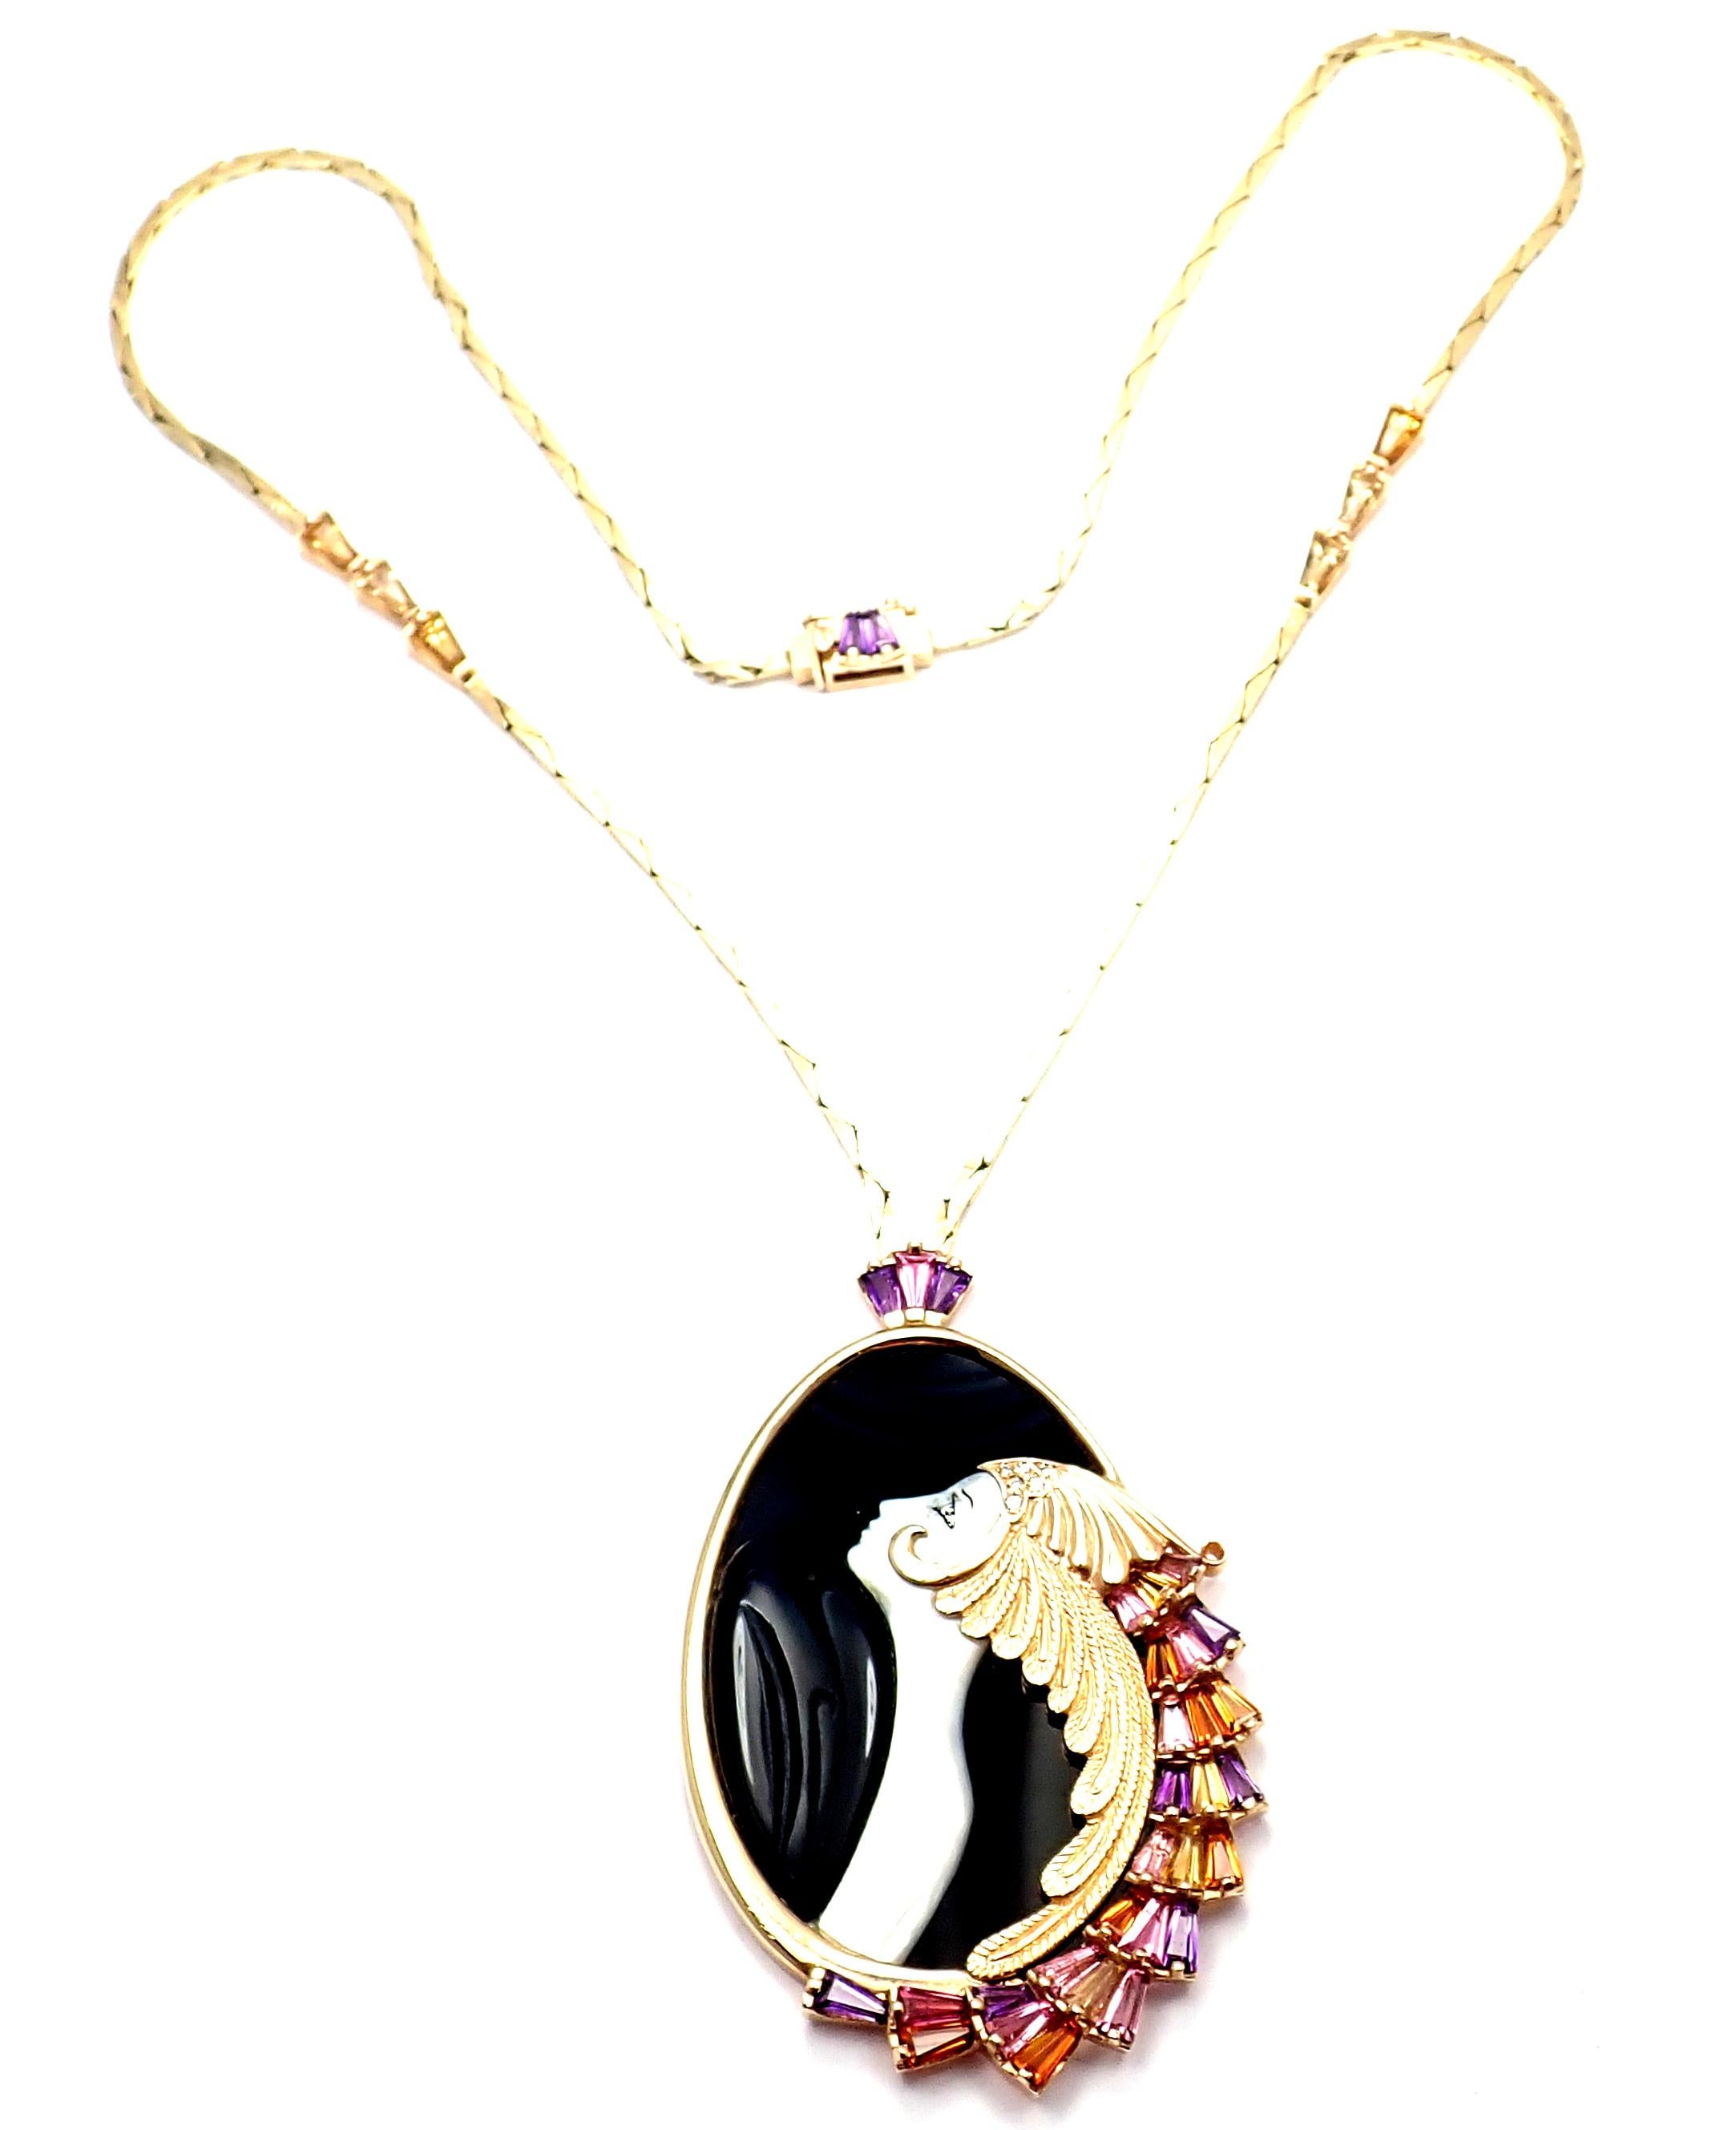 Stunning 14k yellow gold, diamond, mother of pearl, black onyx, pink tourmaline, citrine, amethyst necklace titled, 